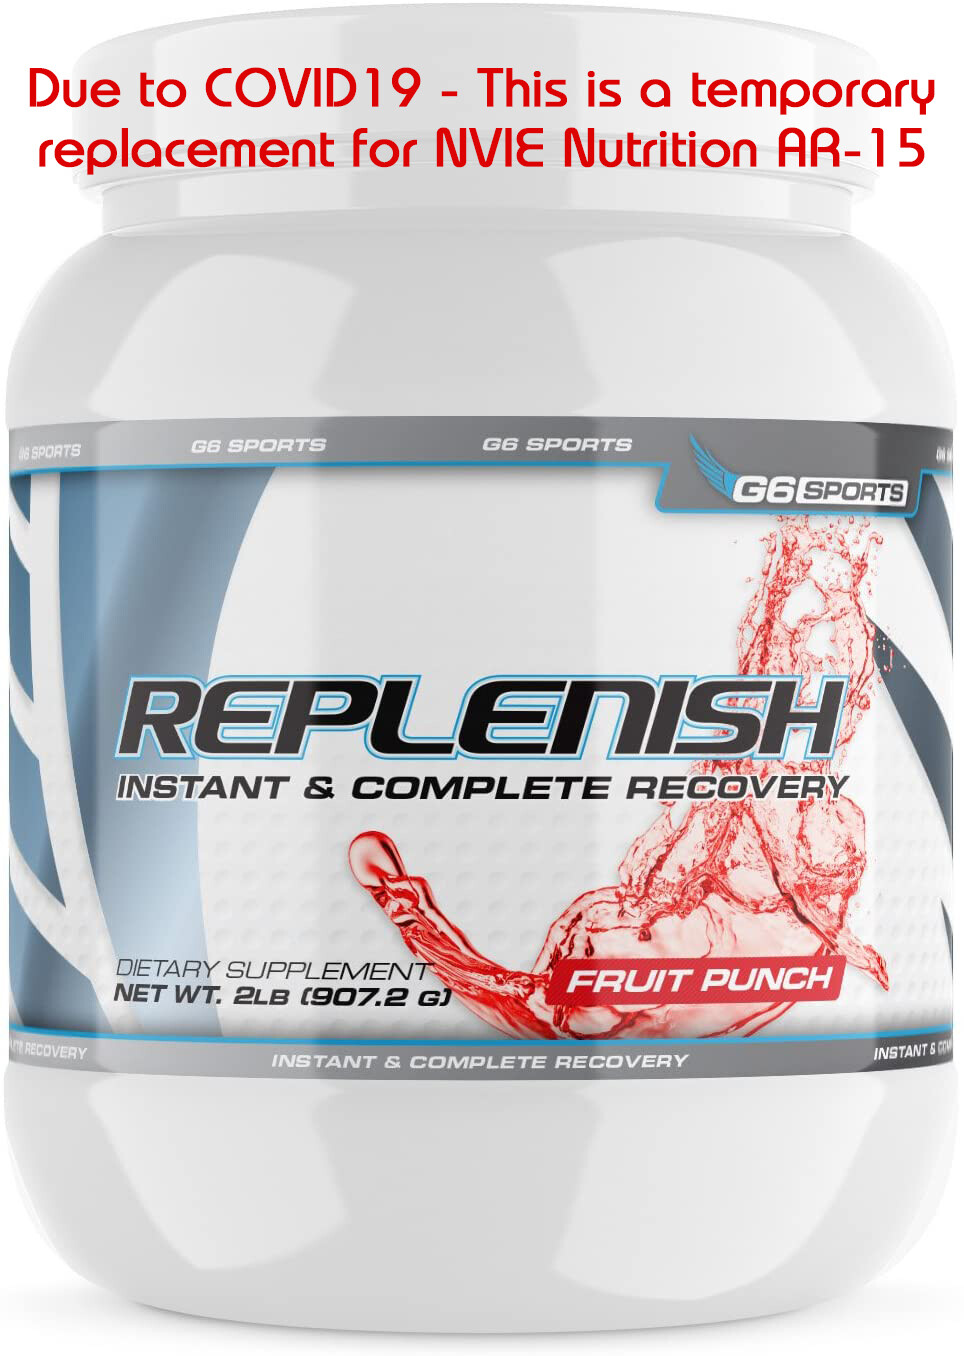 REPLENISH Instant & Complete Recovery